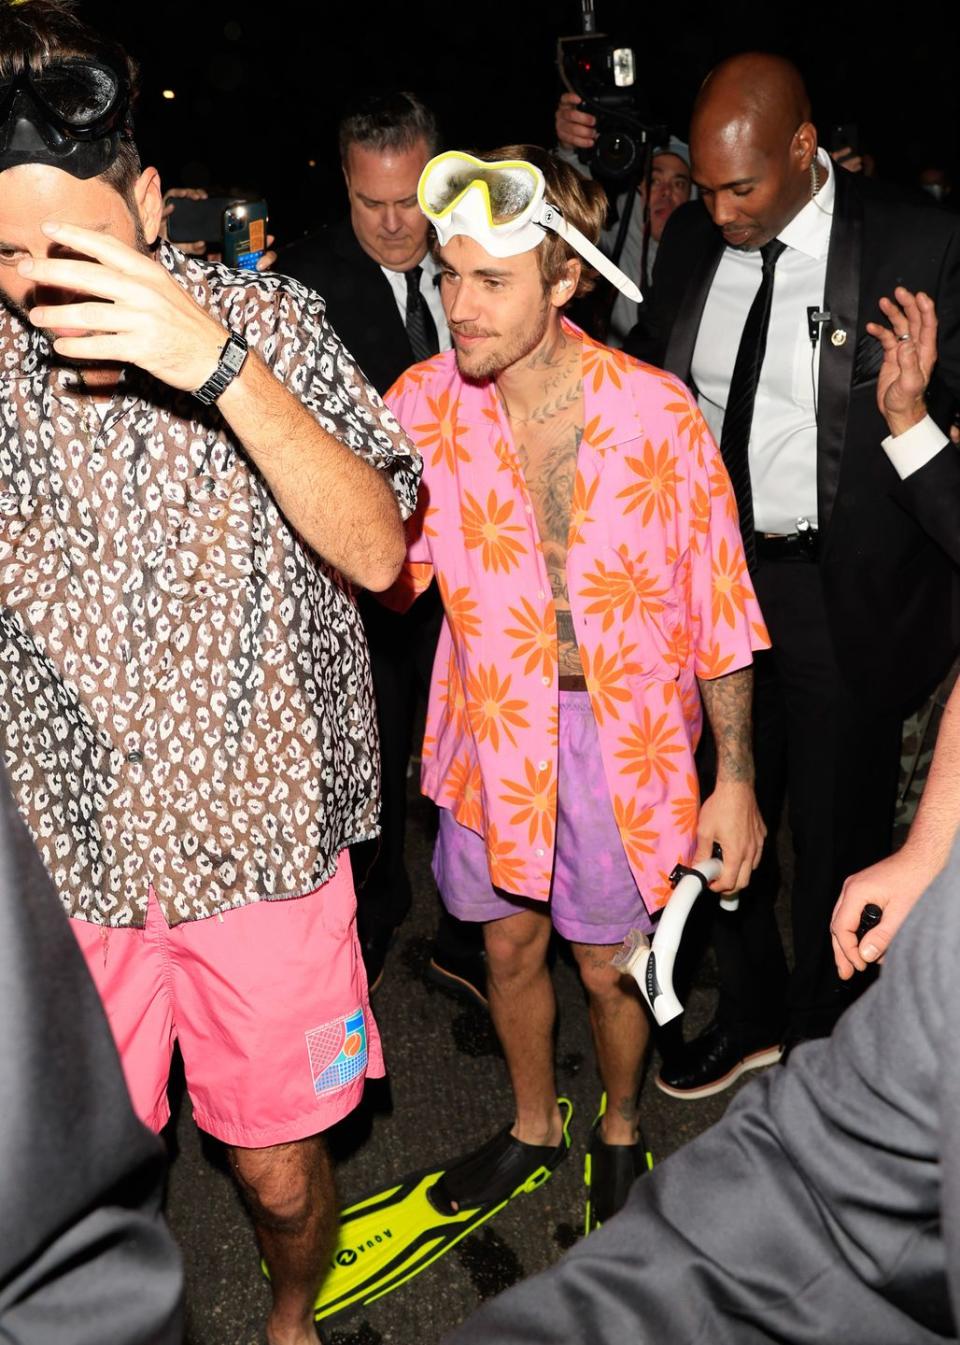 los angeles, ca october 27 justin bieber is seen at casamigos halloween party on october 27, 2023 in los angeles, california photo by rachpootbauer griffingc images